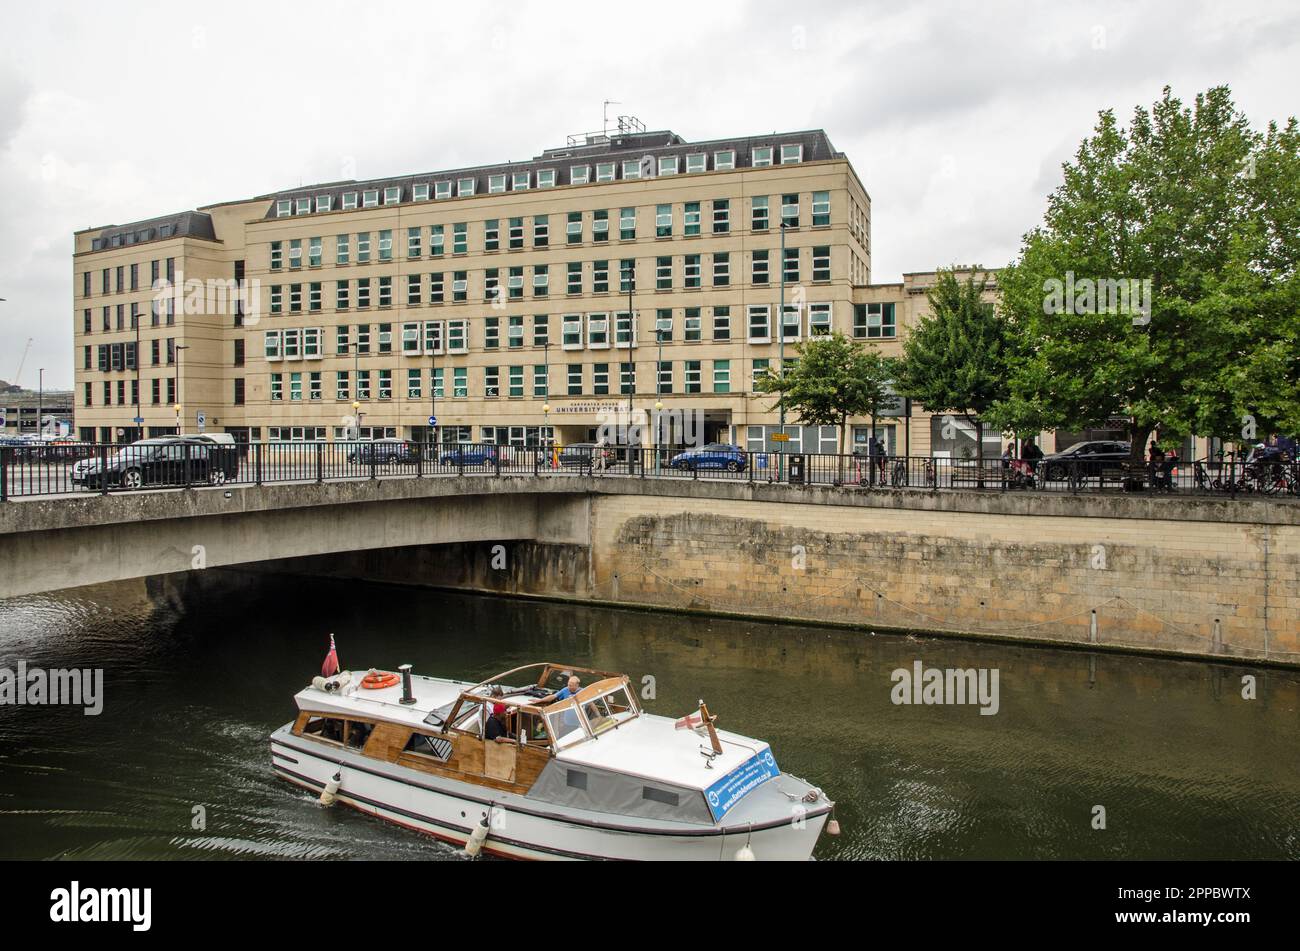 Bath, UK - September 3, 2022: A pleasure boat motoring along the River Avon in front of Carpenter House - part of the University of Bath in Somerset o Stock Photo